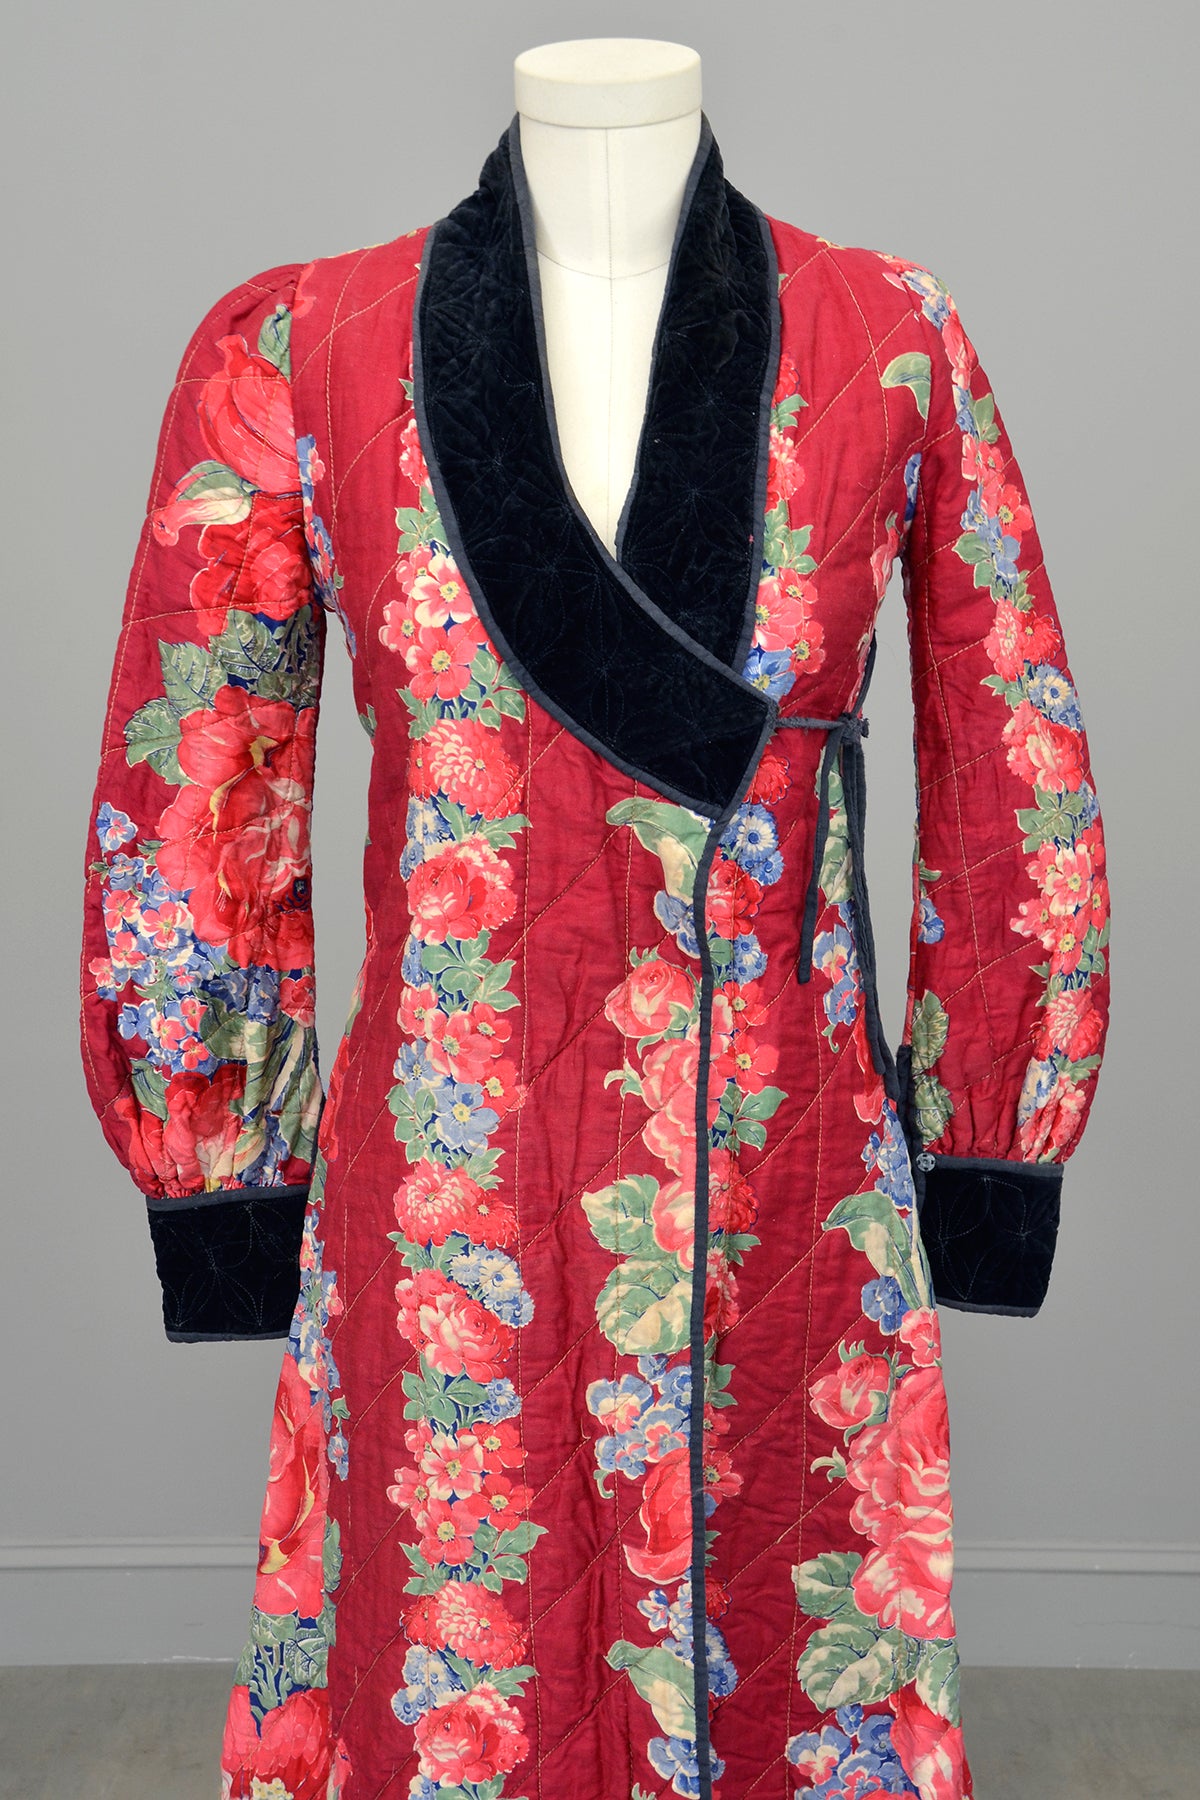 1930s Cranberry Rose Print Quilted House Coat Robe